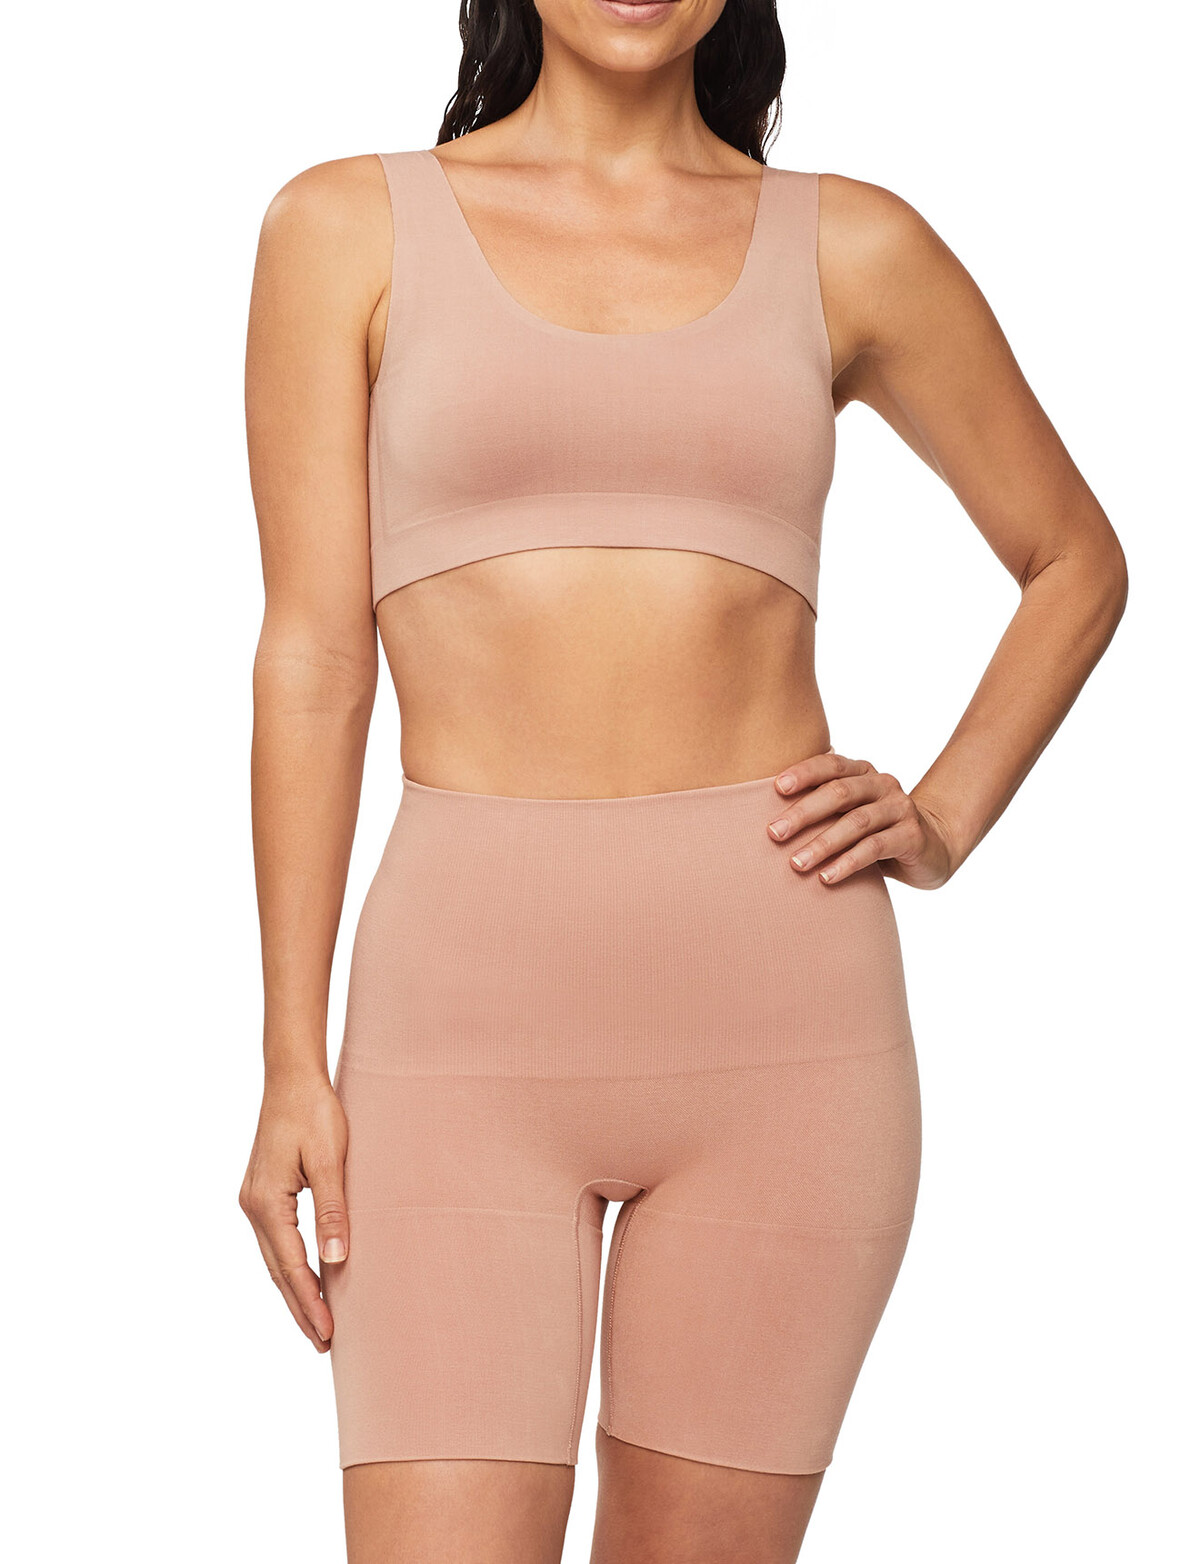 Bamboo high-waisted shaping control shorts - tummy control underwear